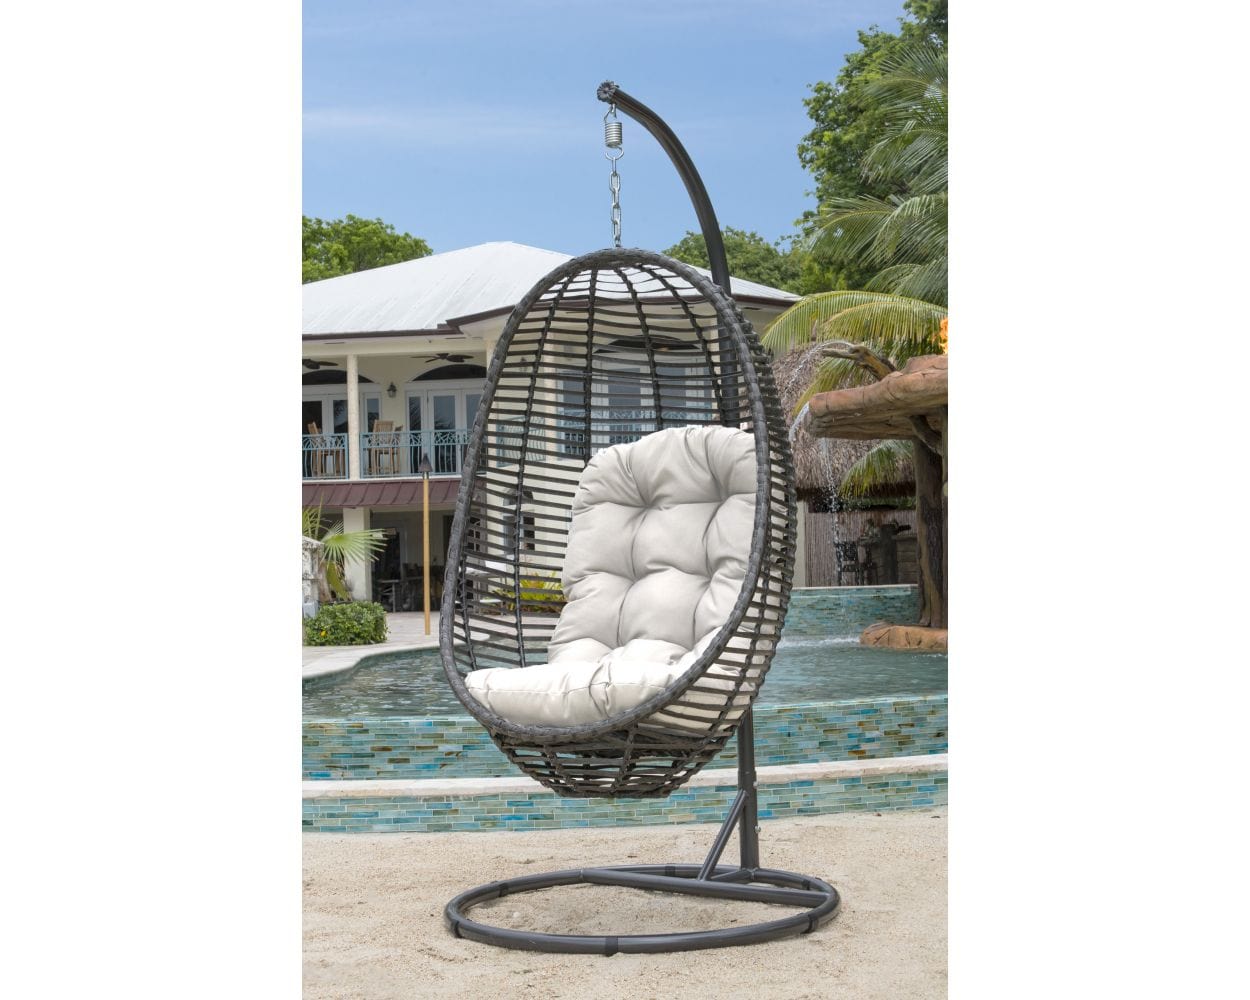 Dreamline Single Seater Hanging Swing Jhula With Stand For Balcony/Garden Swing (Black)